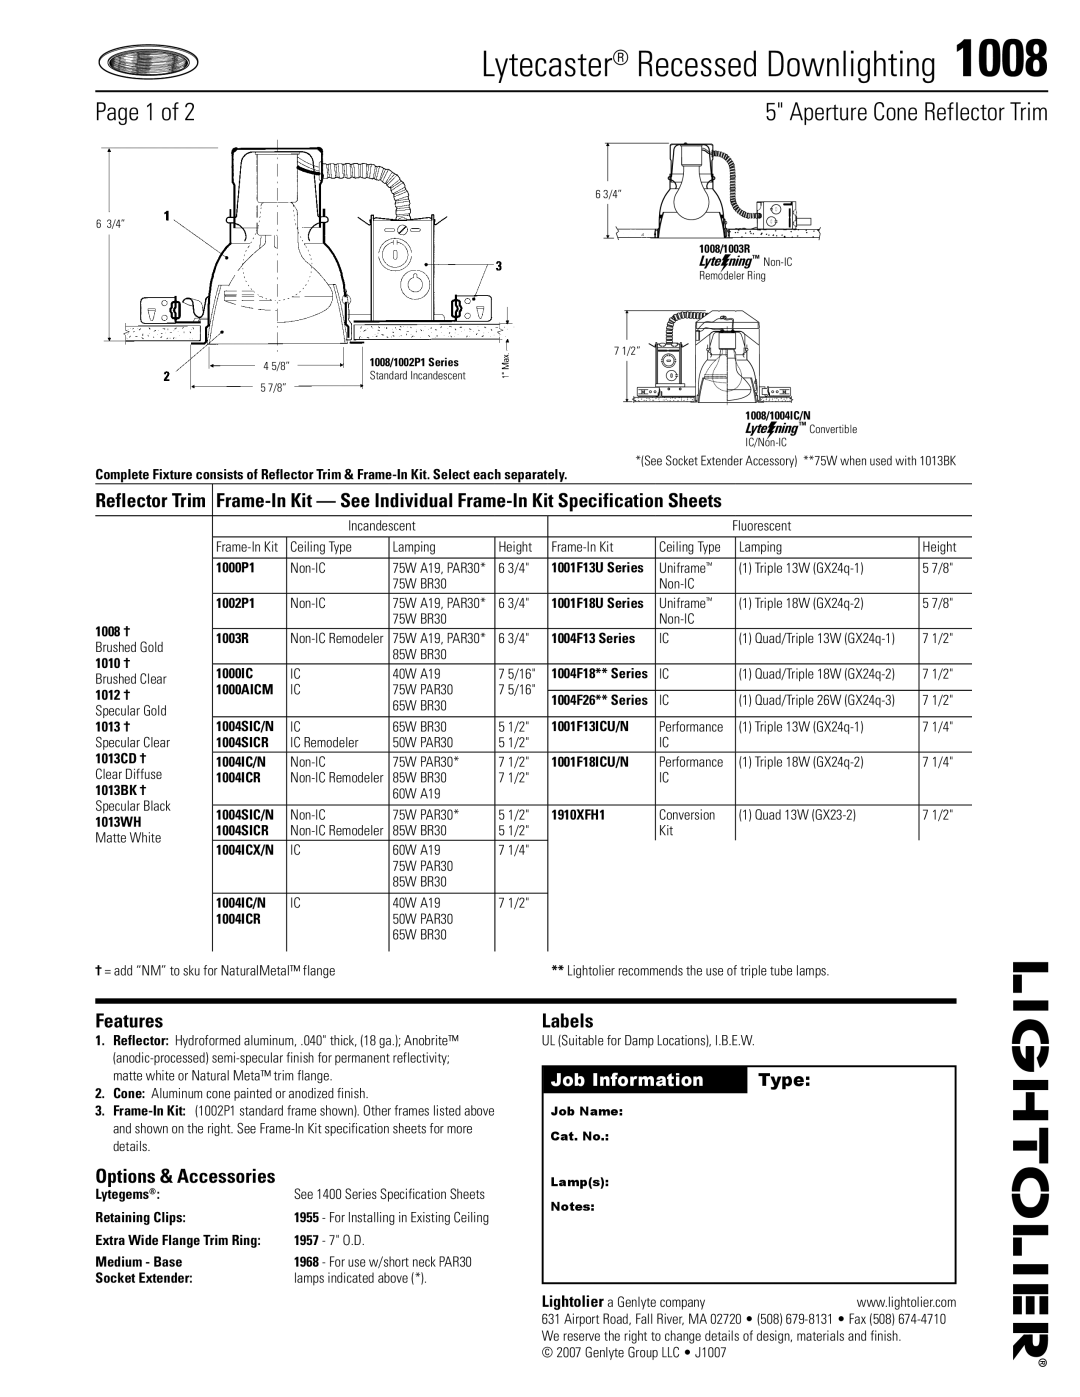 Lightolier 1008 specifications Page of, Aperture Cone Reflector Trim, Job Information, Type, Features, Labels 